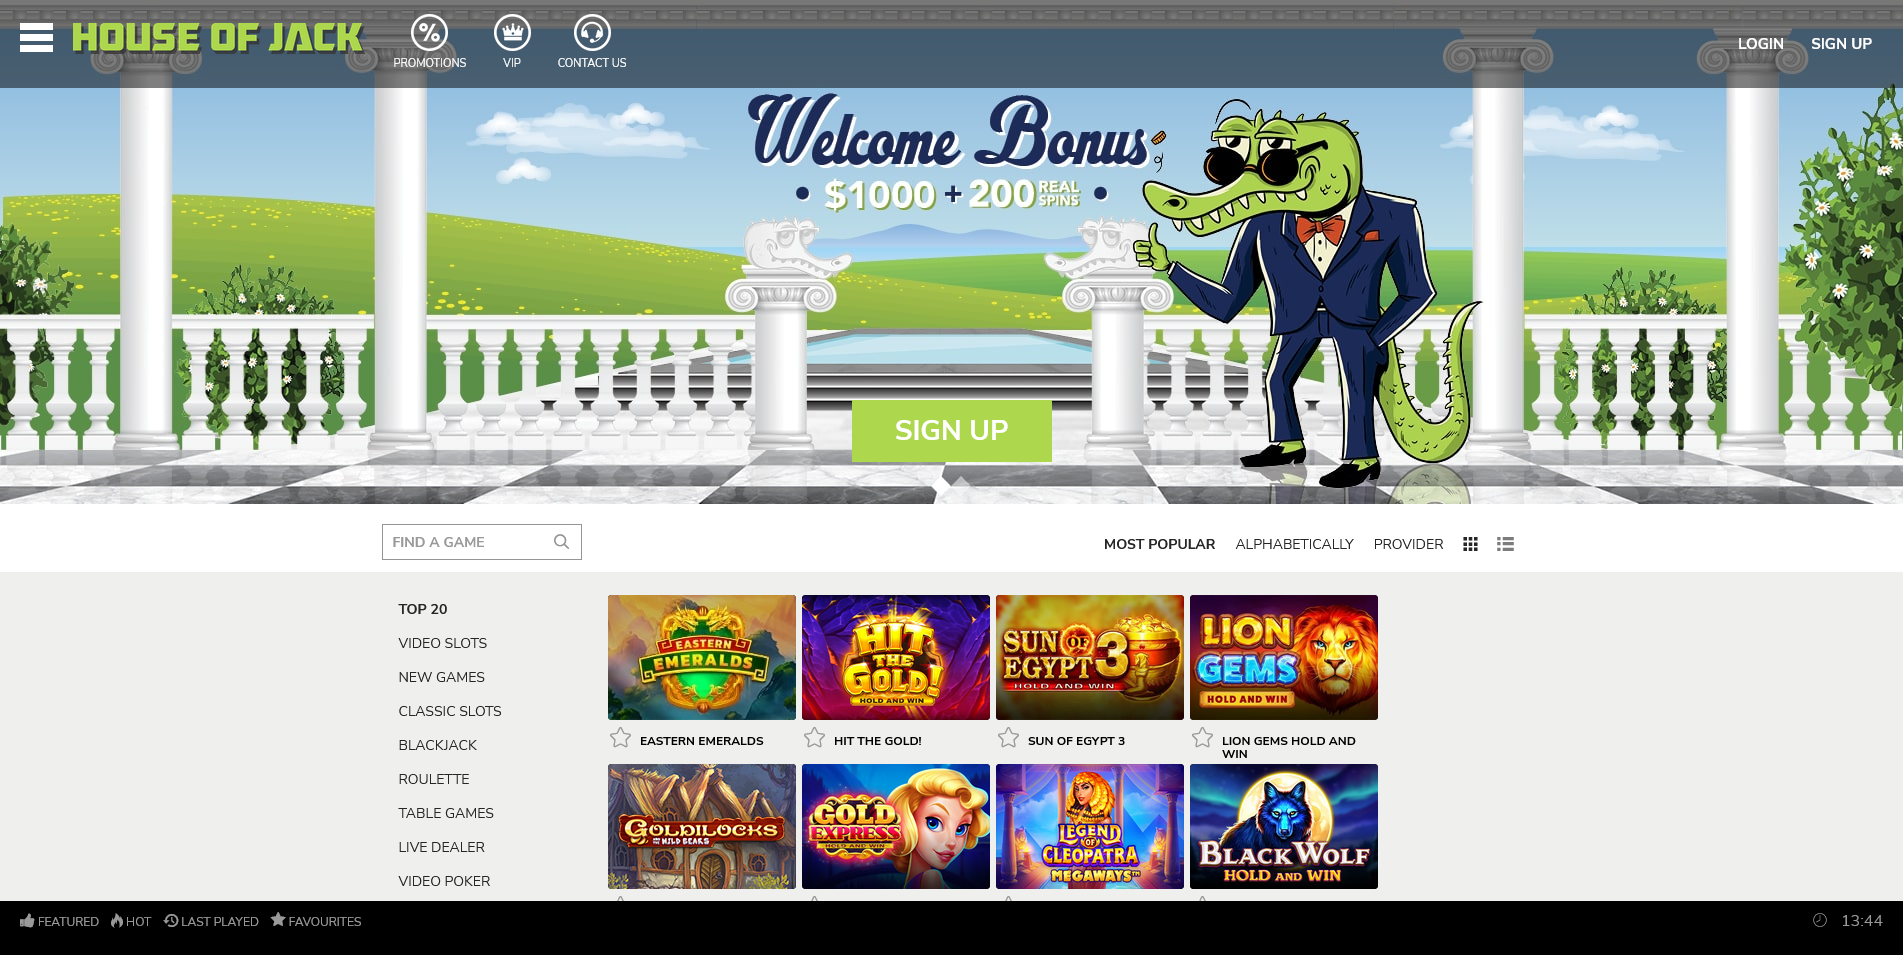 Screenshot of the House of Jack Casino home page